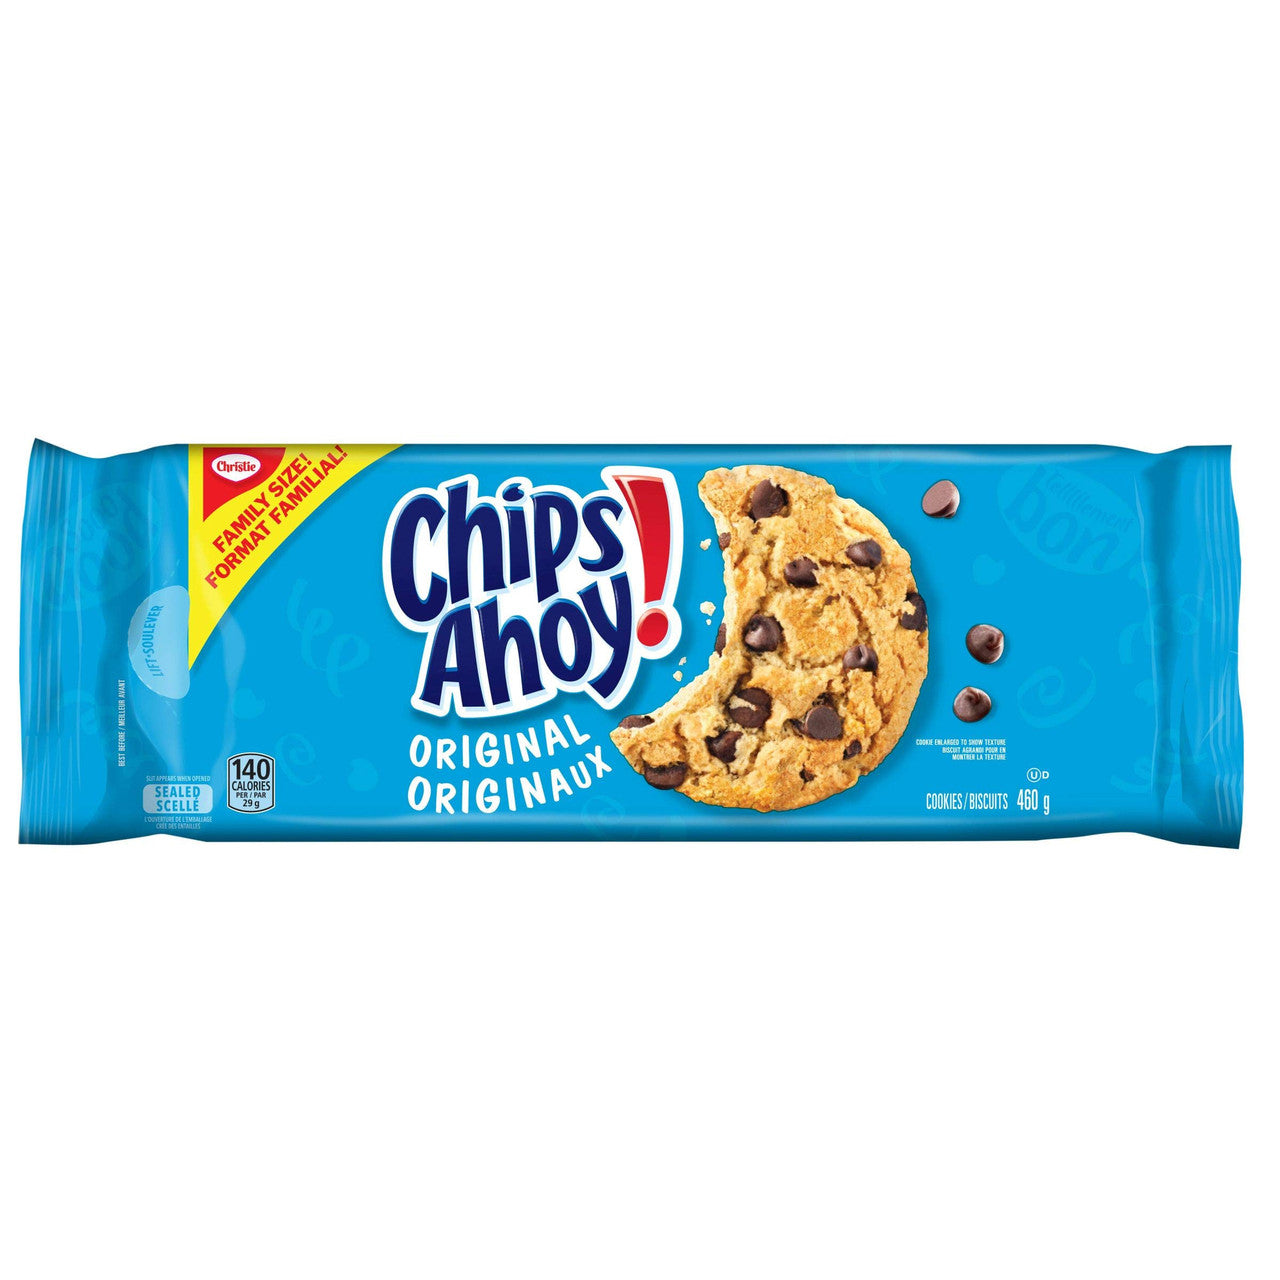 Chips Ahoy! Original Chocolate-Chip Cookies, 460g/16.2oz., {Imported from Canada}